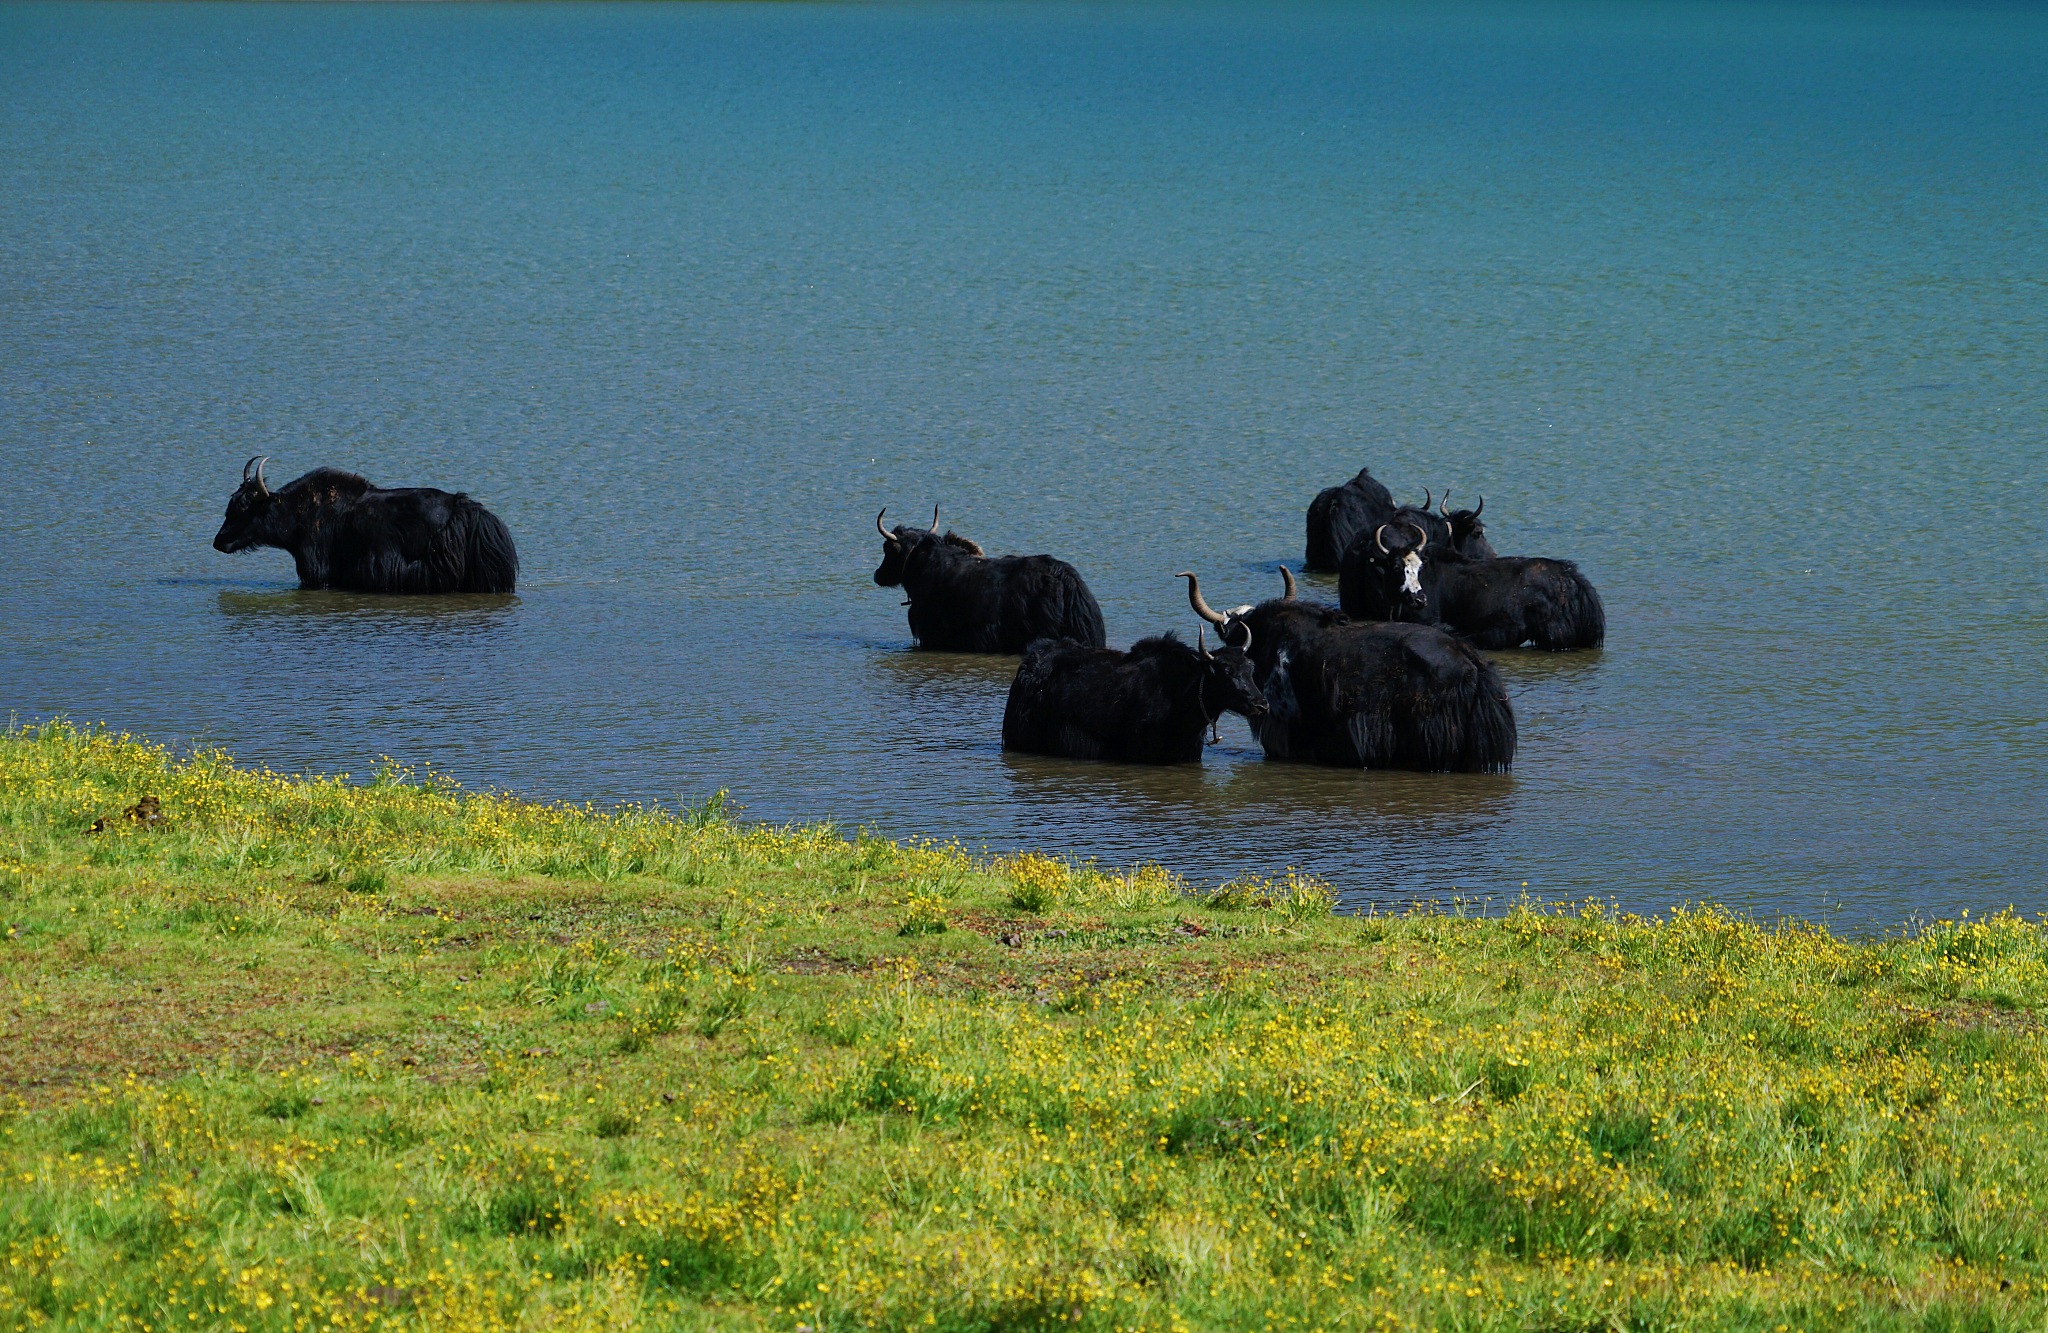 Yaks play in the water in Golog Tibetan Autonomous Prefecture, northwest China's Qinghai Province, July 8, 2022. /CFP